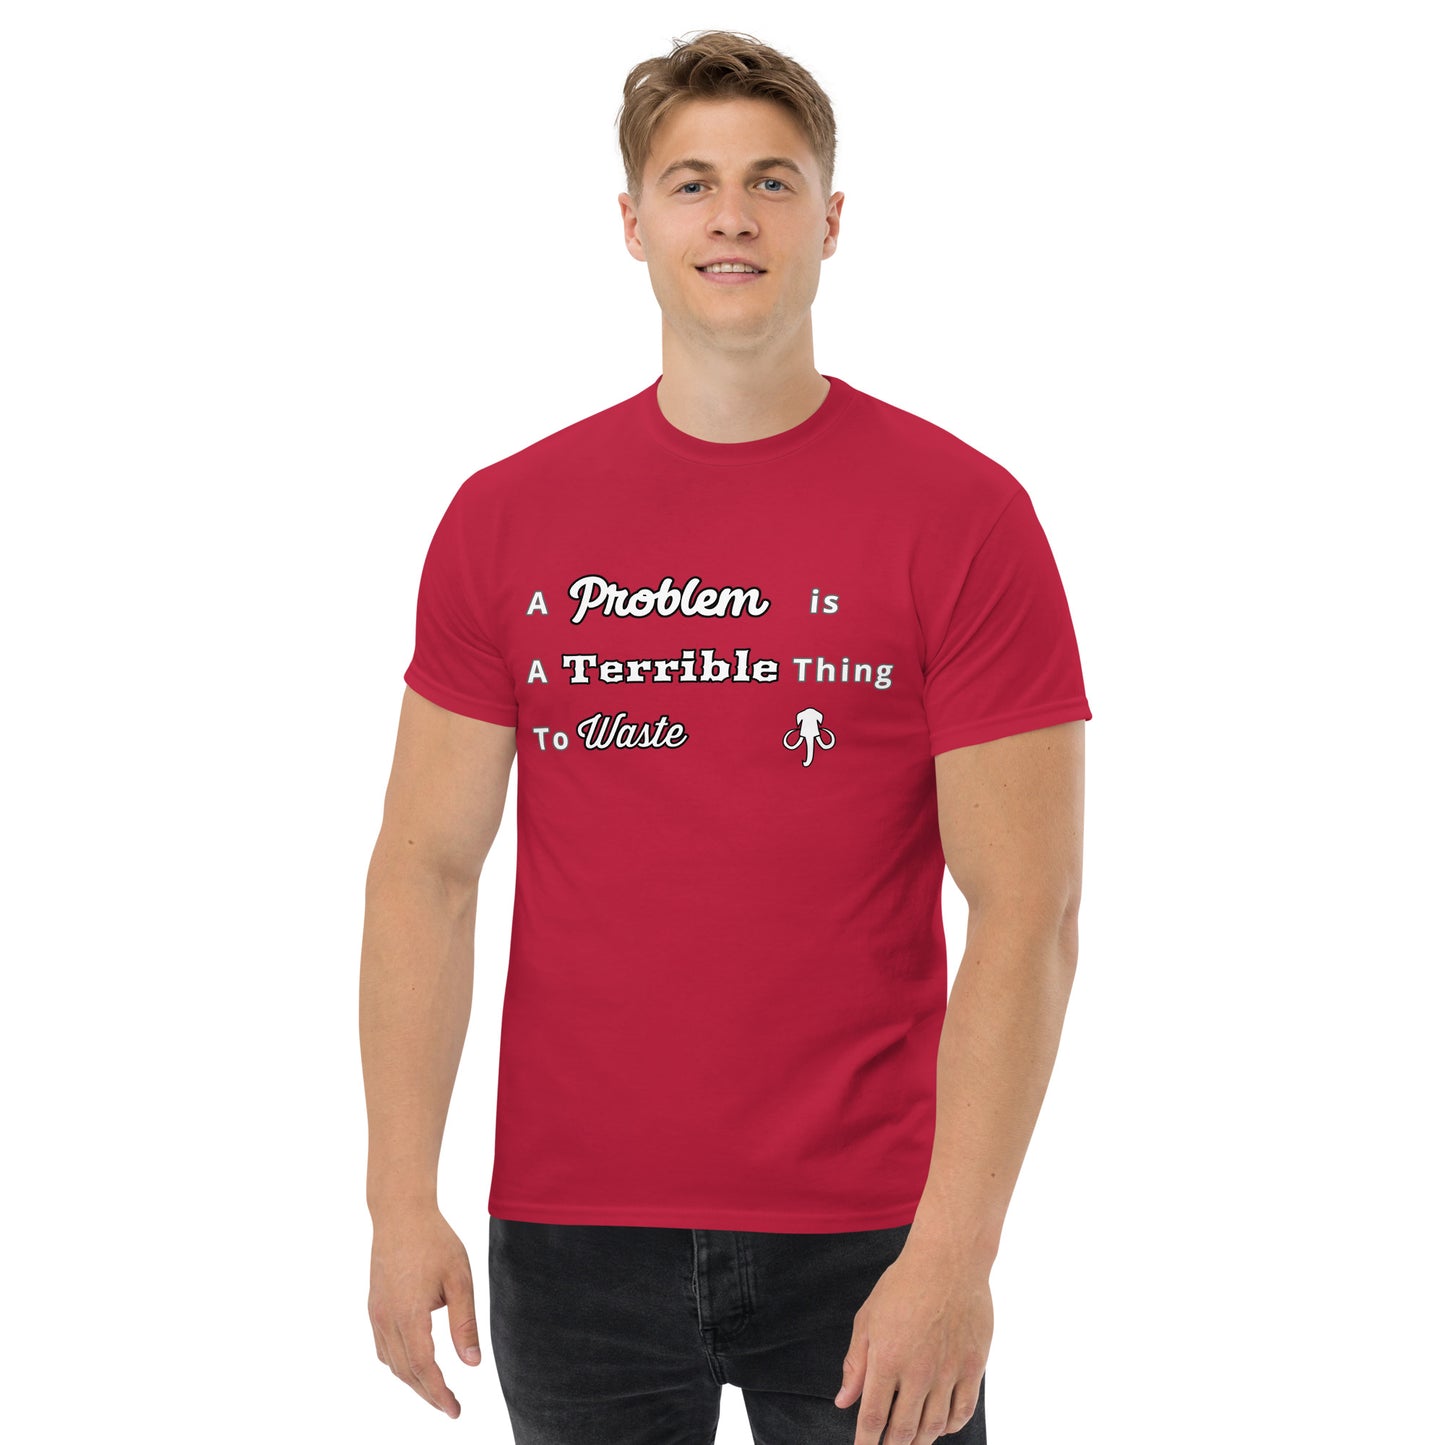 Don't waste your Problems (Men's classic tee)